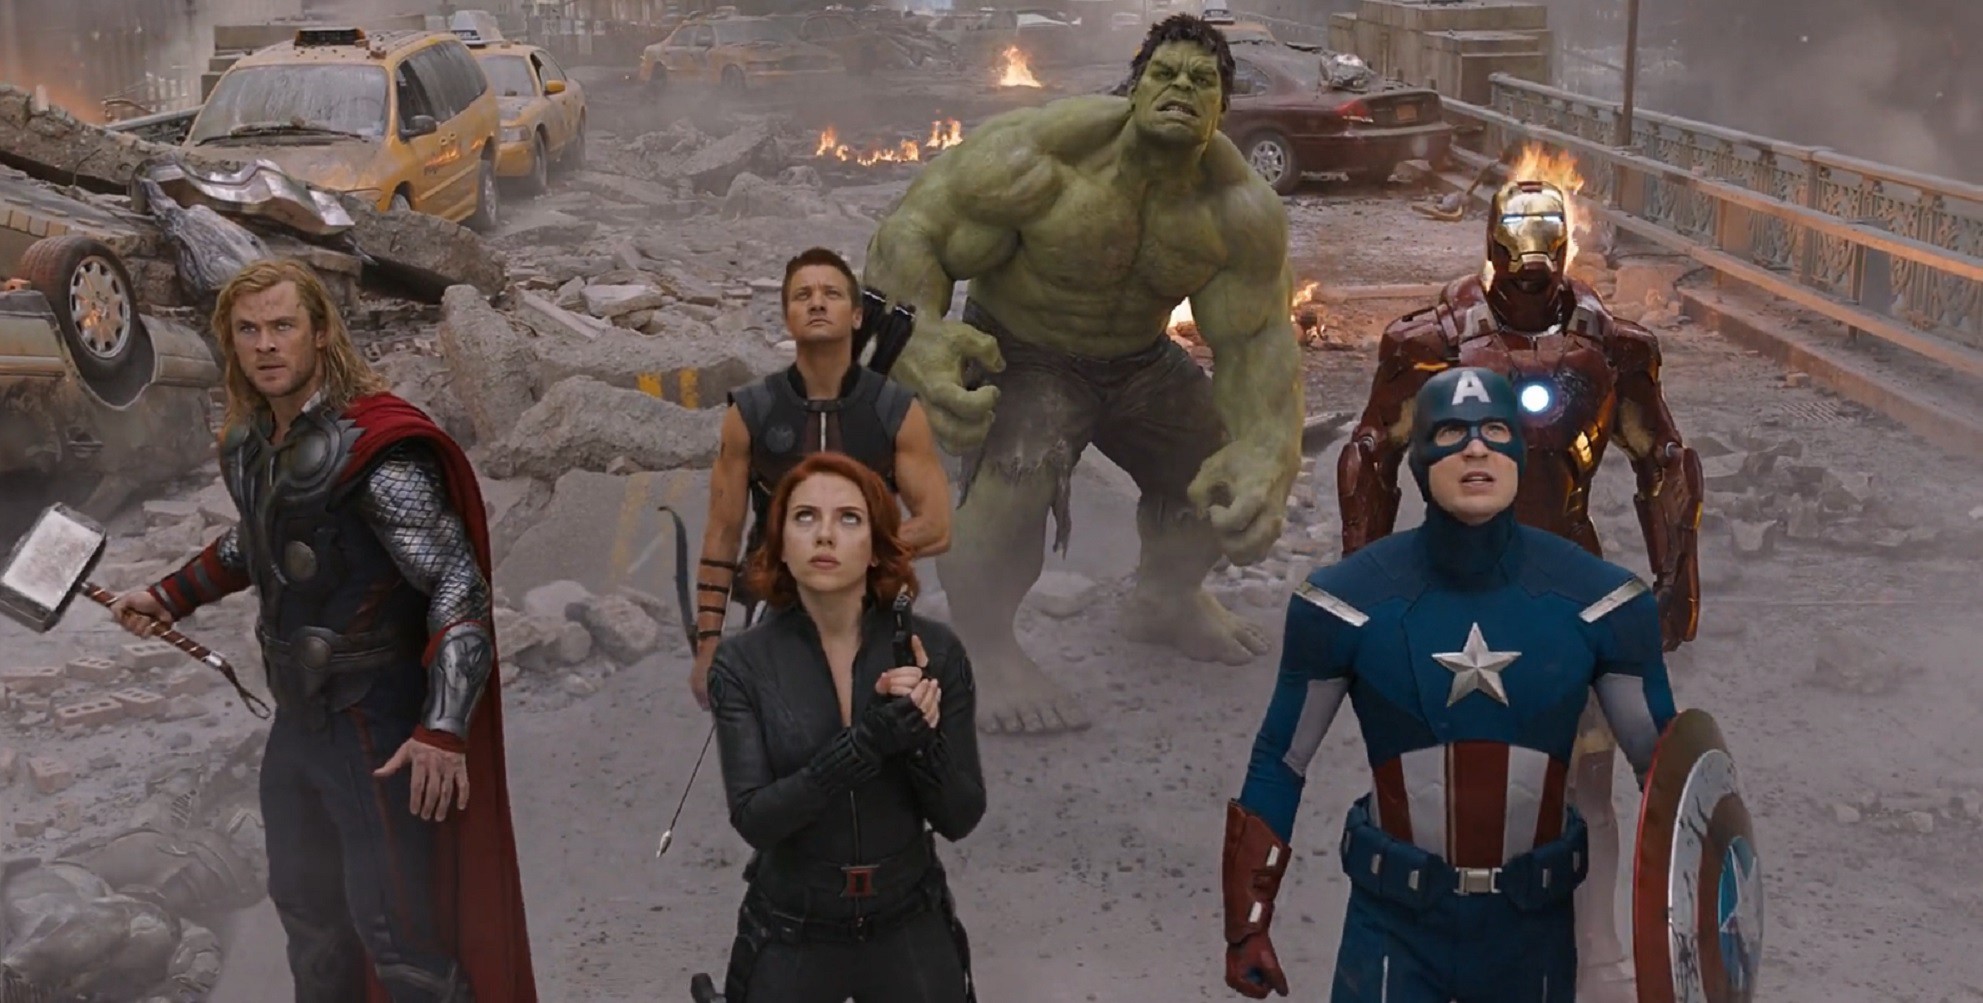 Avengers, Assemble! "Iron Man 3" and "The Avengers" Will Be Returning